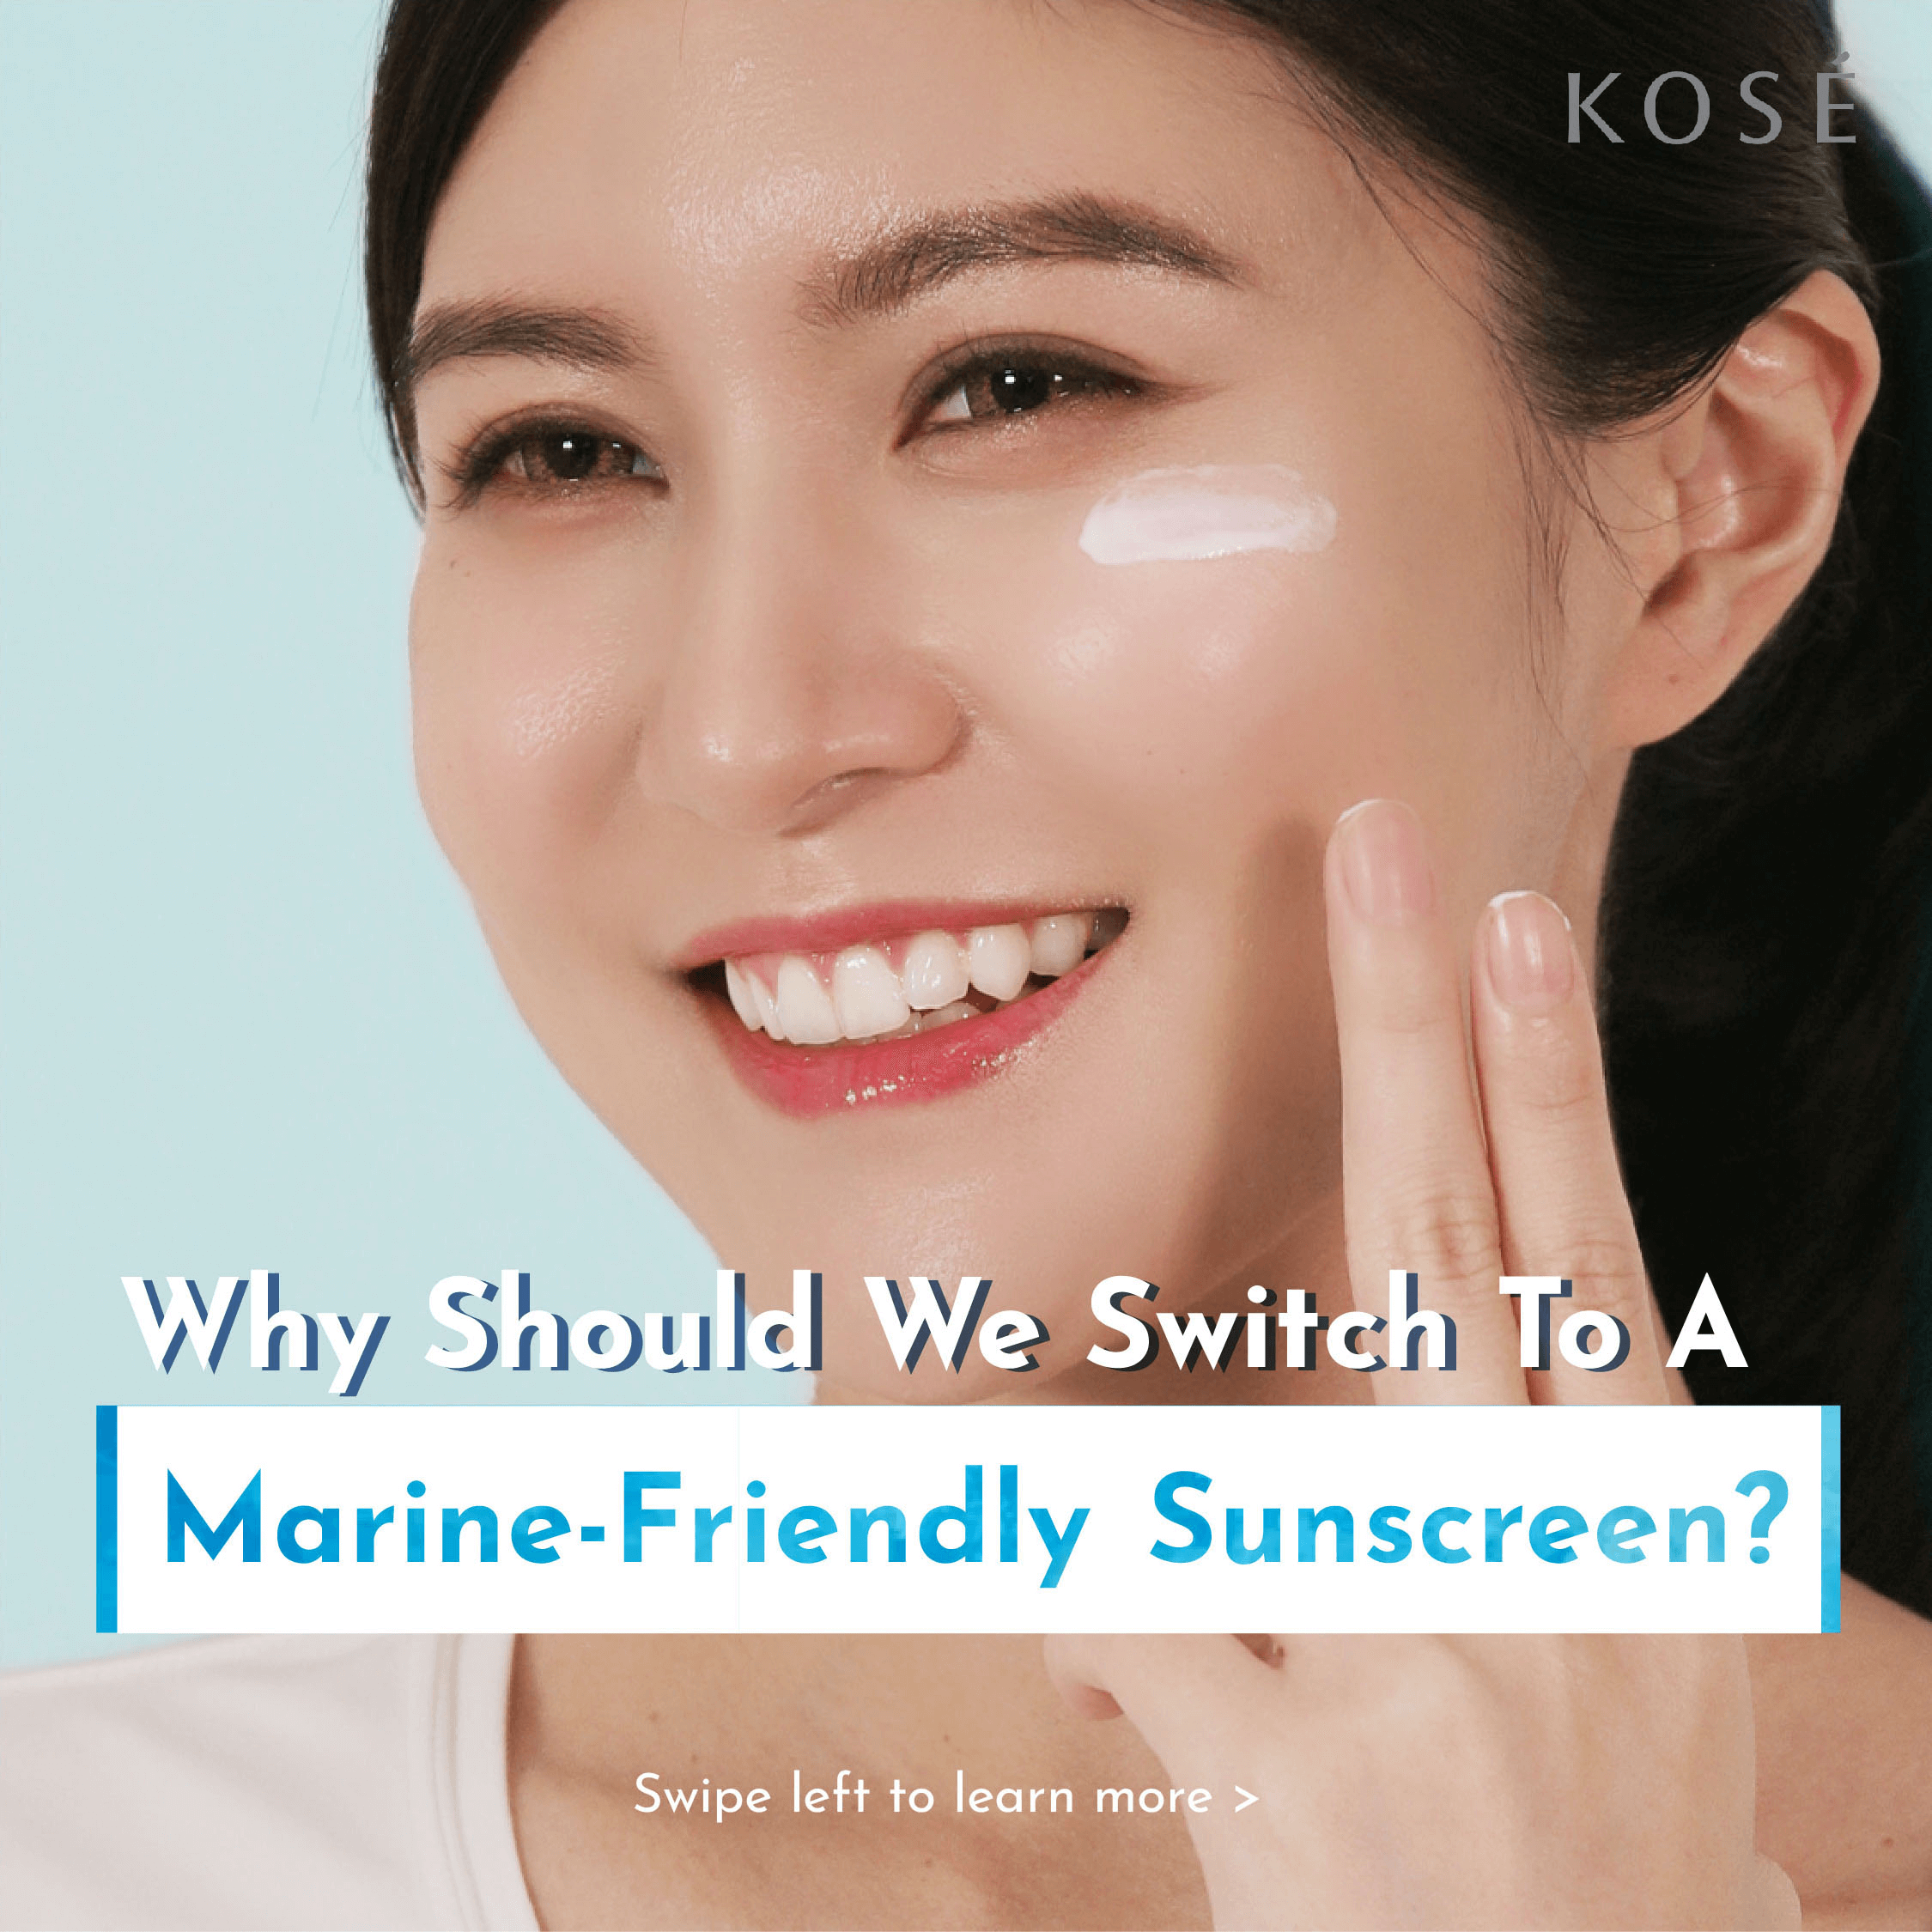 Why Should We Switch To A Marine-Friendly Sunscreen?